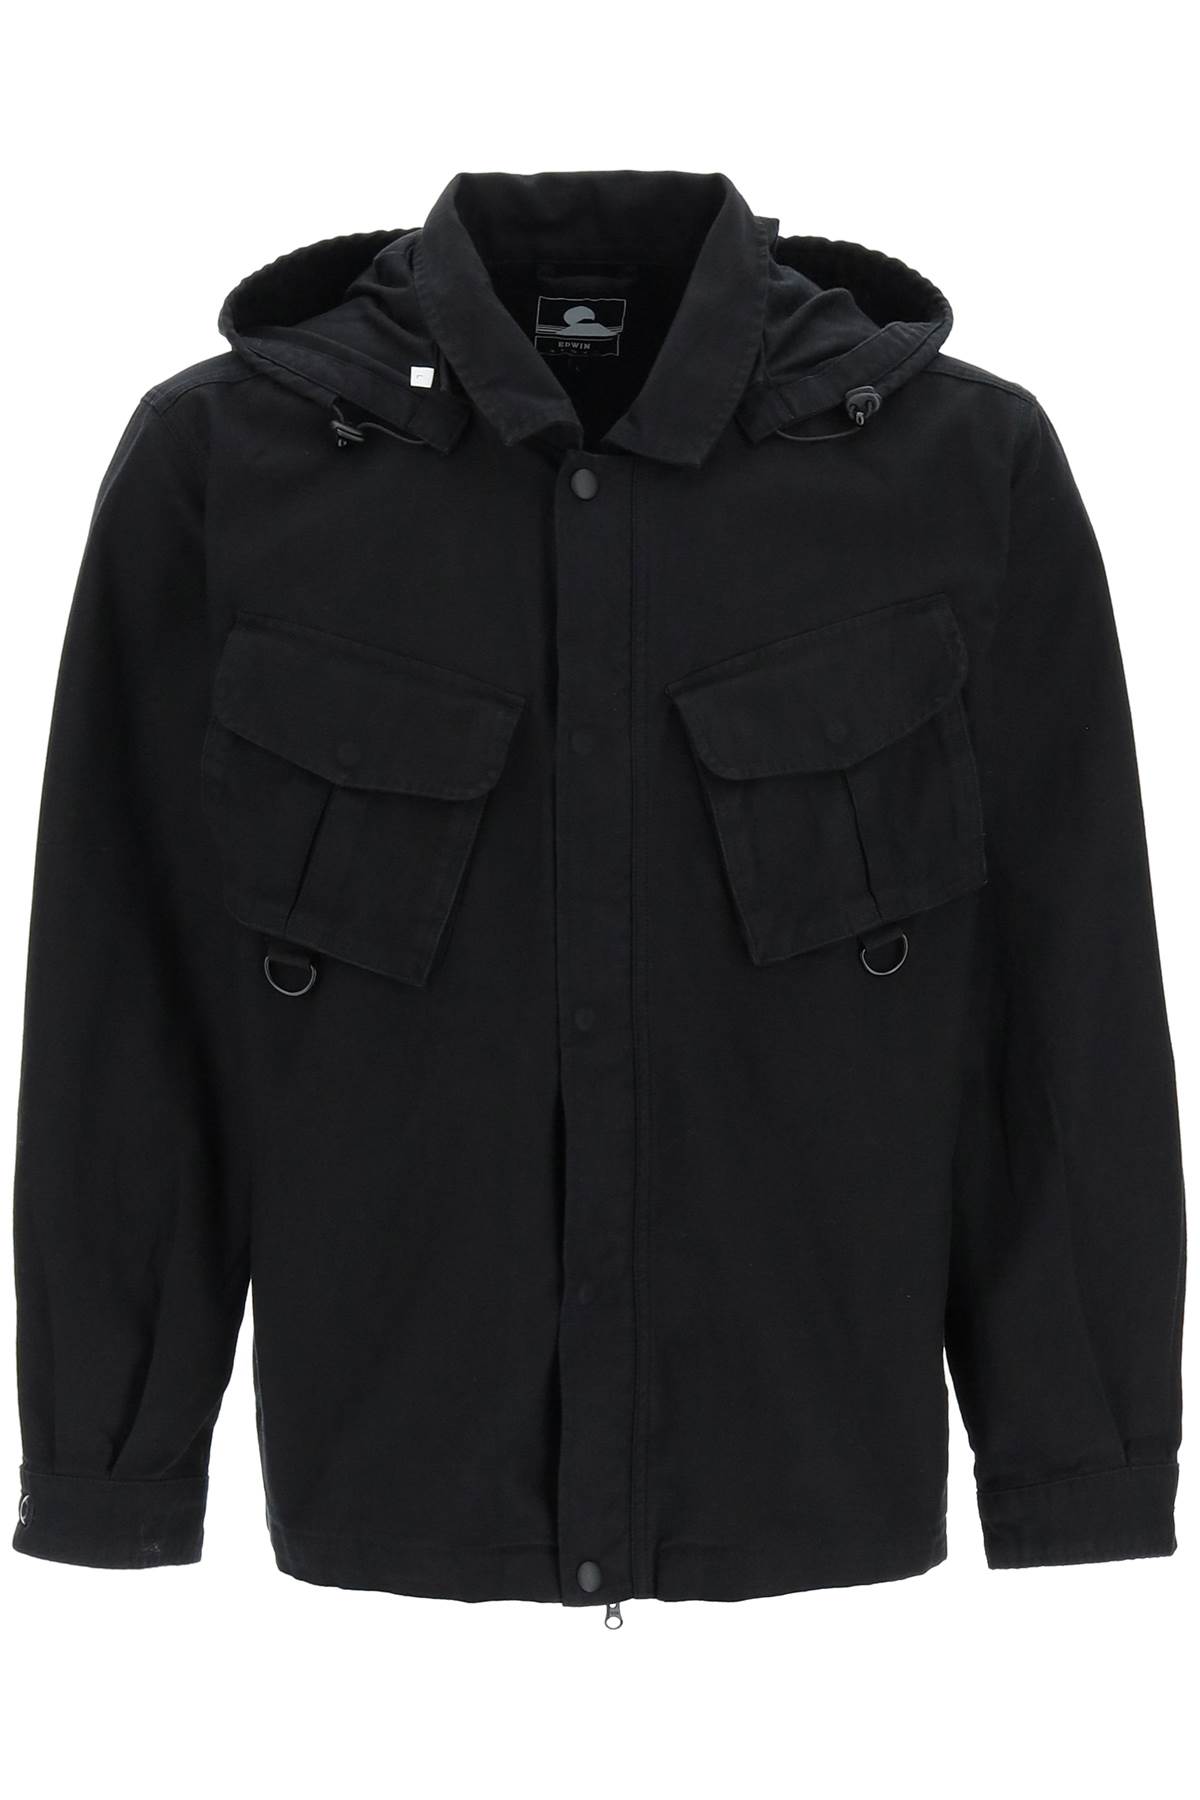 Edwin strategy Cotton Jacket With Snap-off Hood